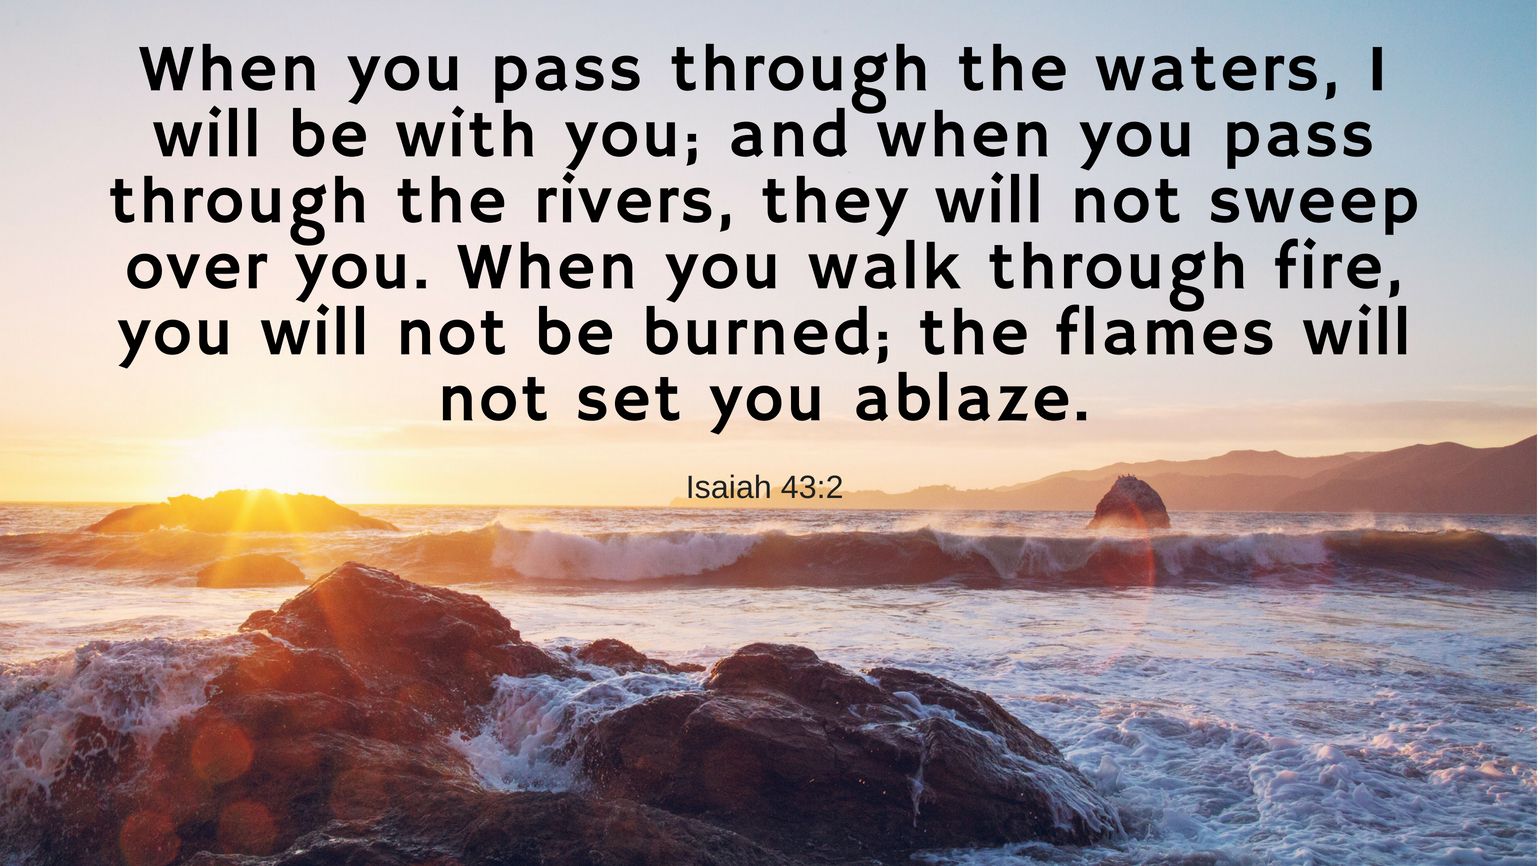 When you pass through the waters, I will be with you; and when you pass through the rivers, they will not sweep over you. When you walk through fire, you will not be burned; the flames will not set you ablaze. Isaiah 43:2